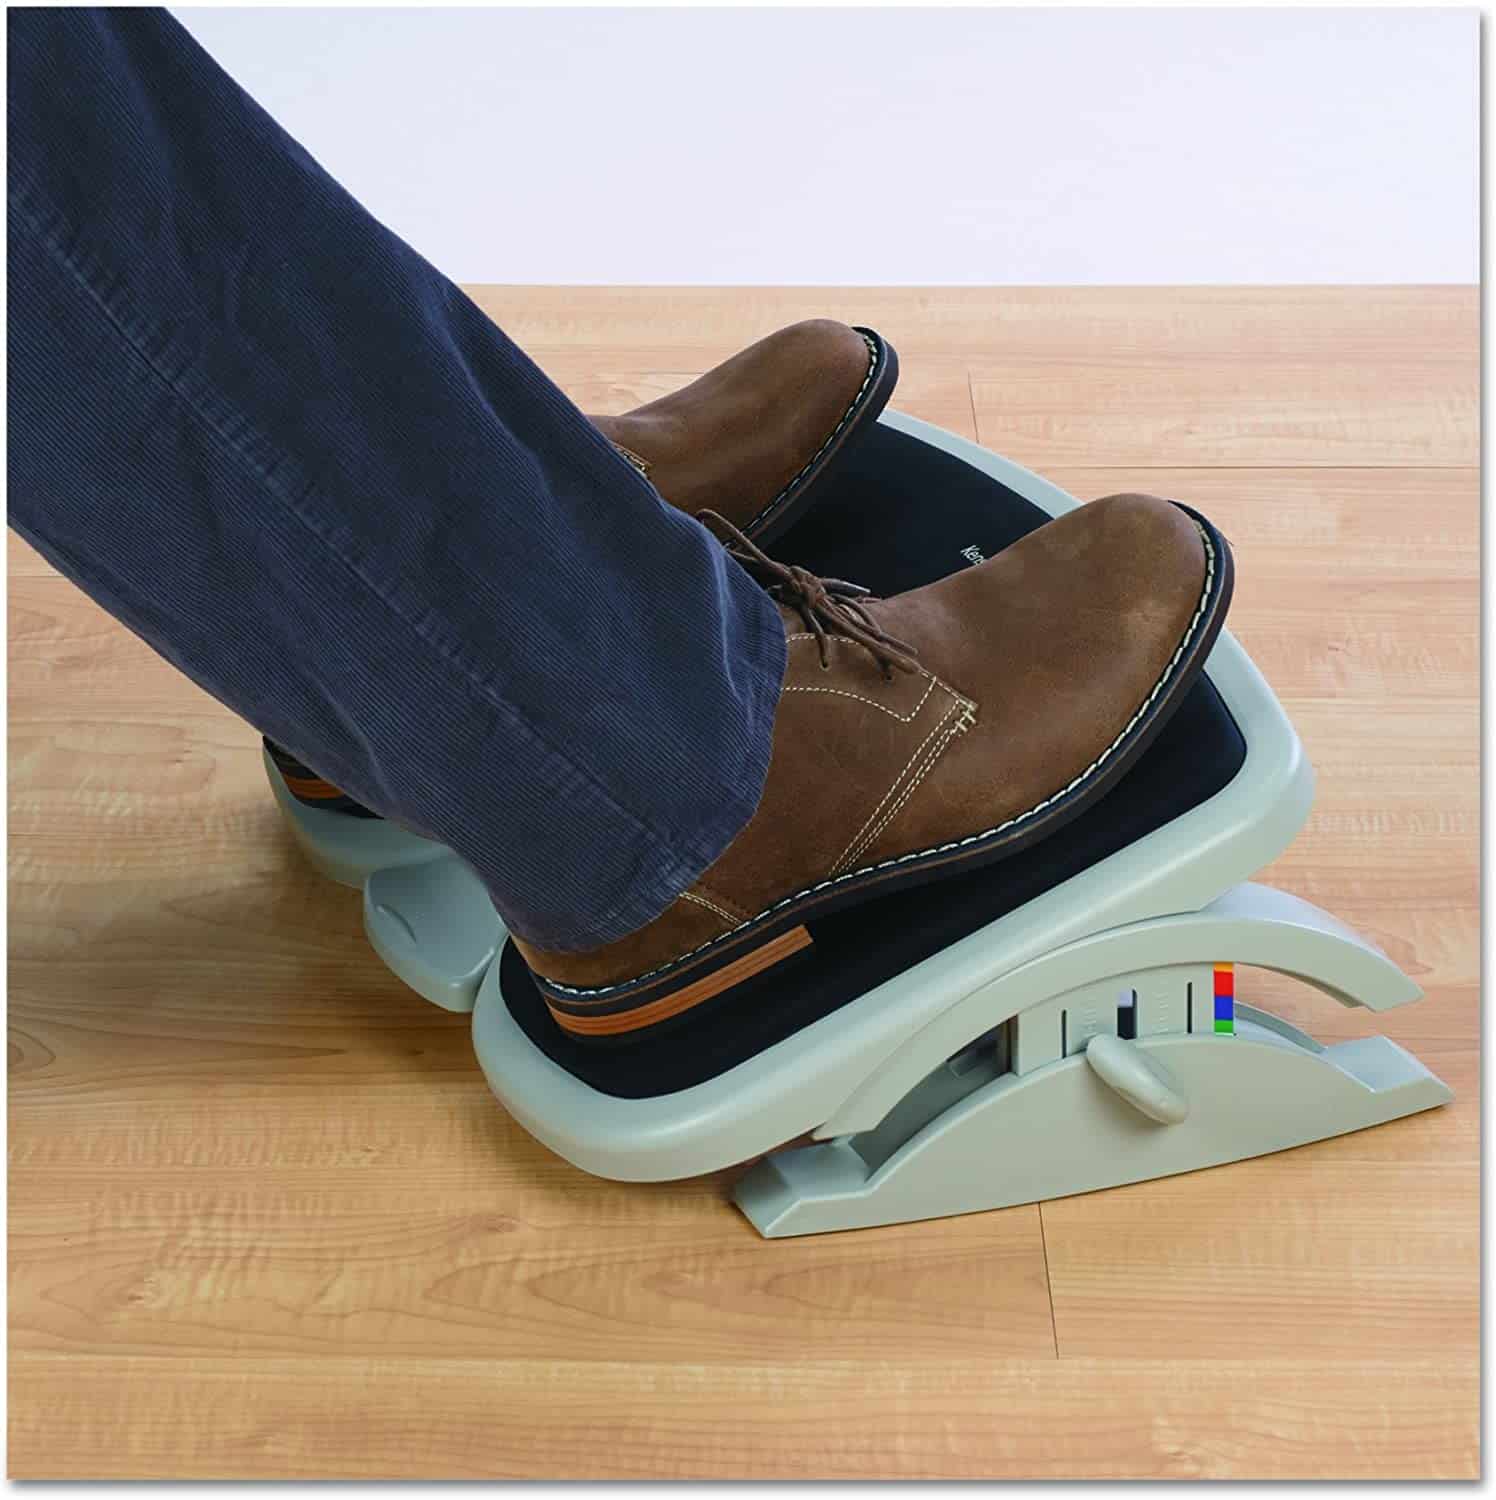 Adjustable Footrest With Foam Pad